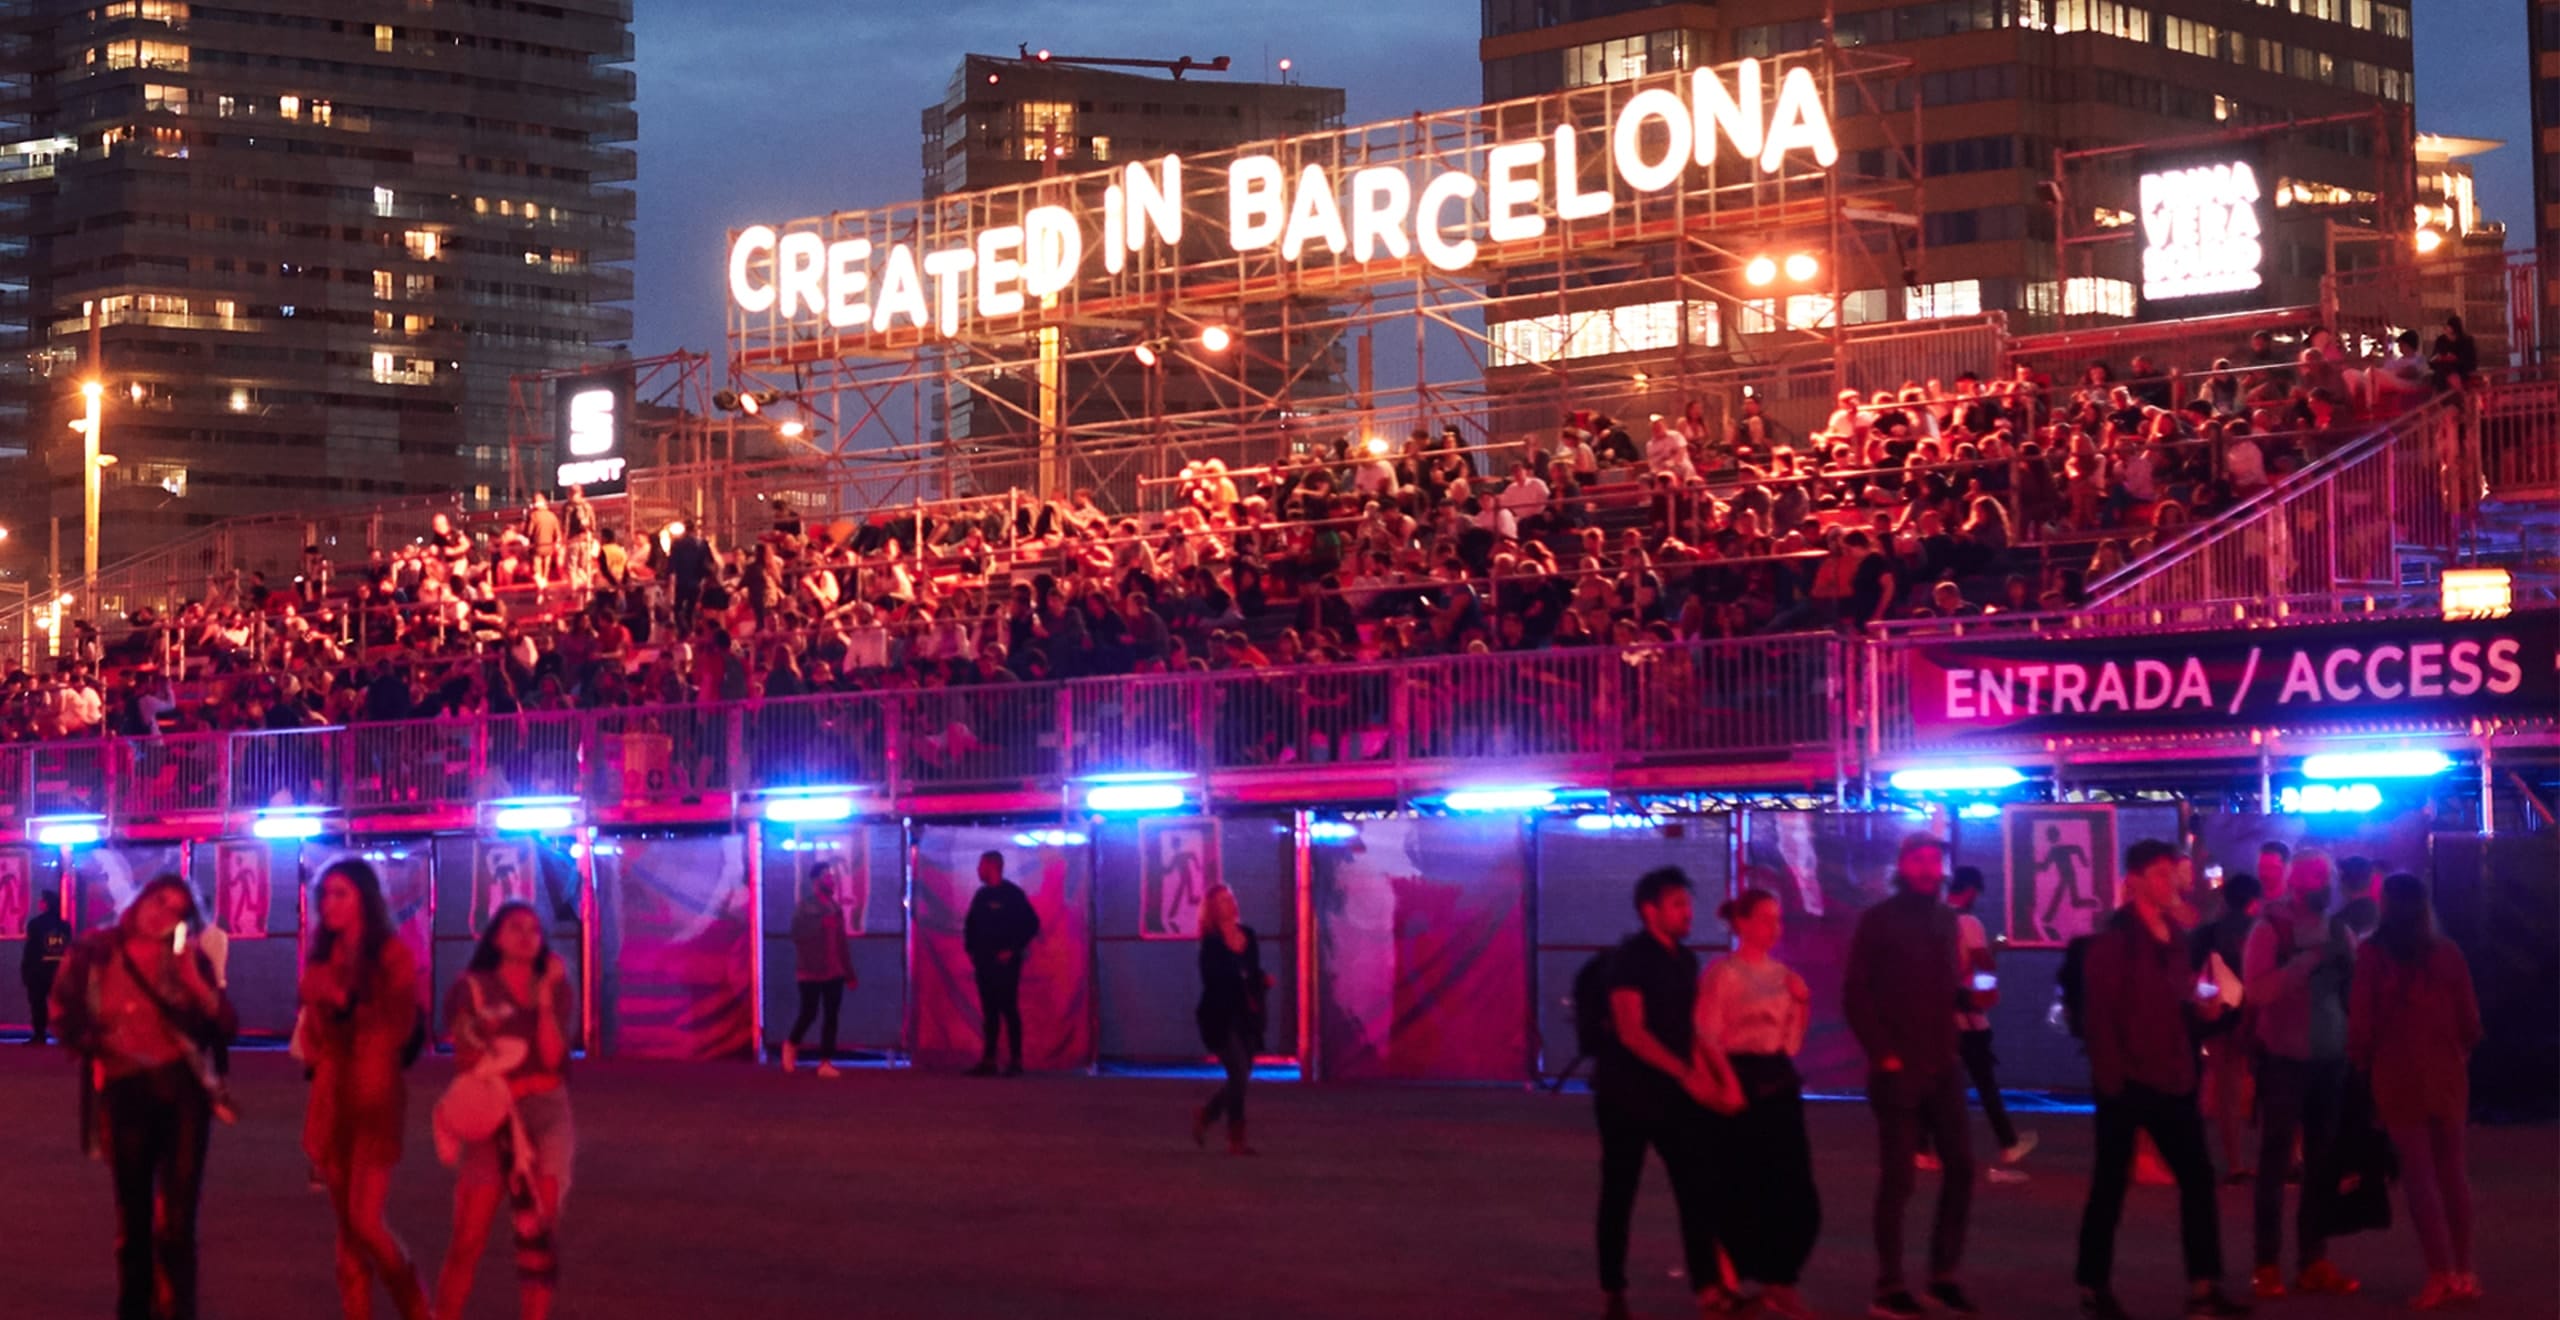 Primavera Sound sponsored by SEAT – Created in Barcelona sign at the music festival